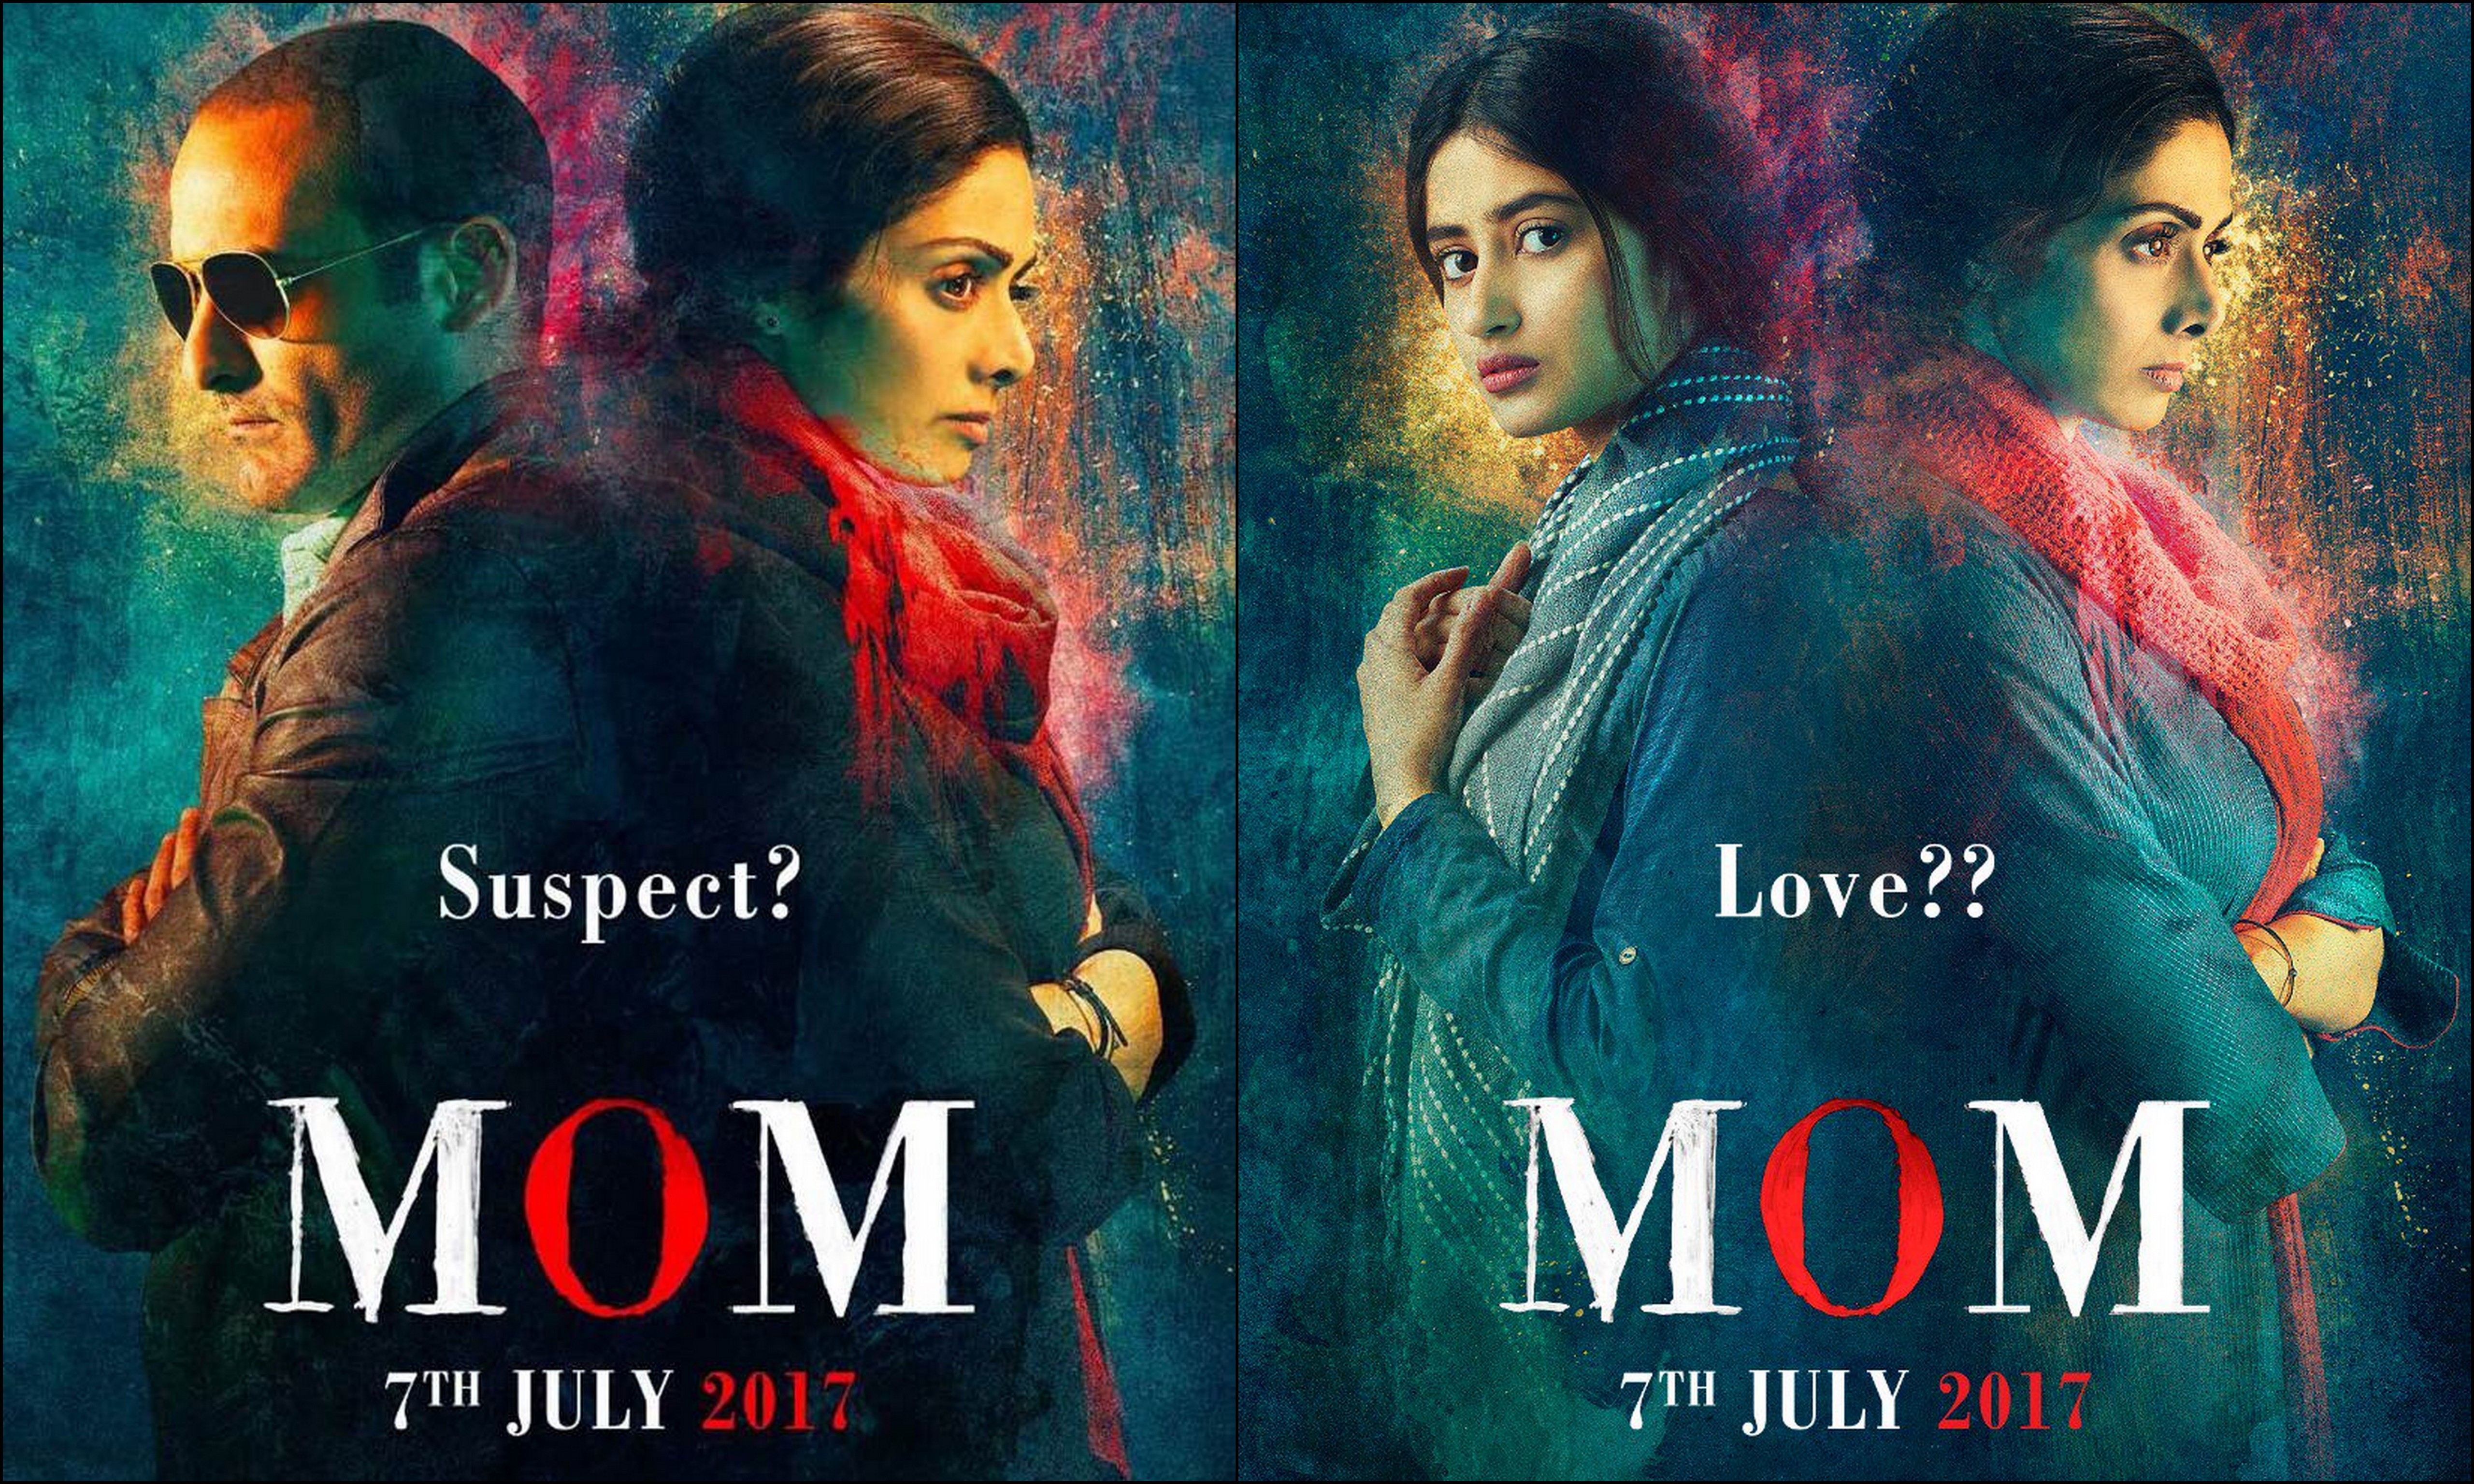 Sridevi starrer ‘Mom’ gets UA certificate with no cuts from CBFC